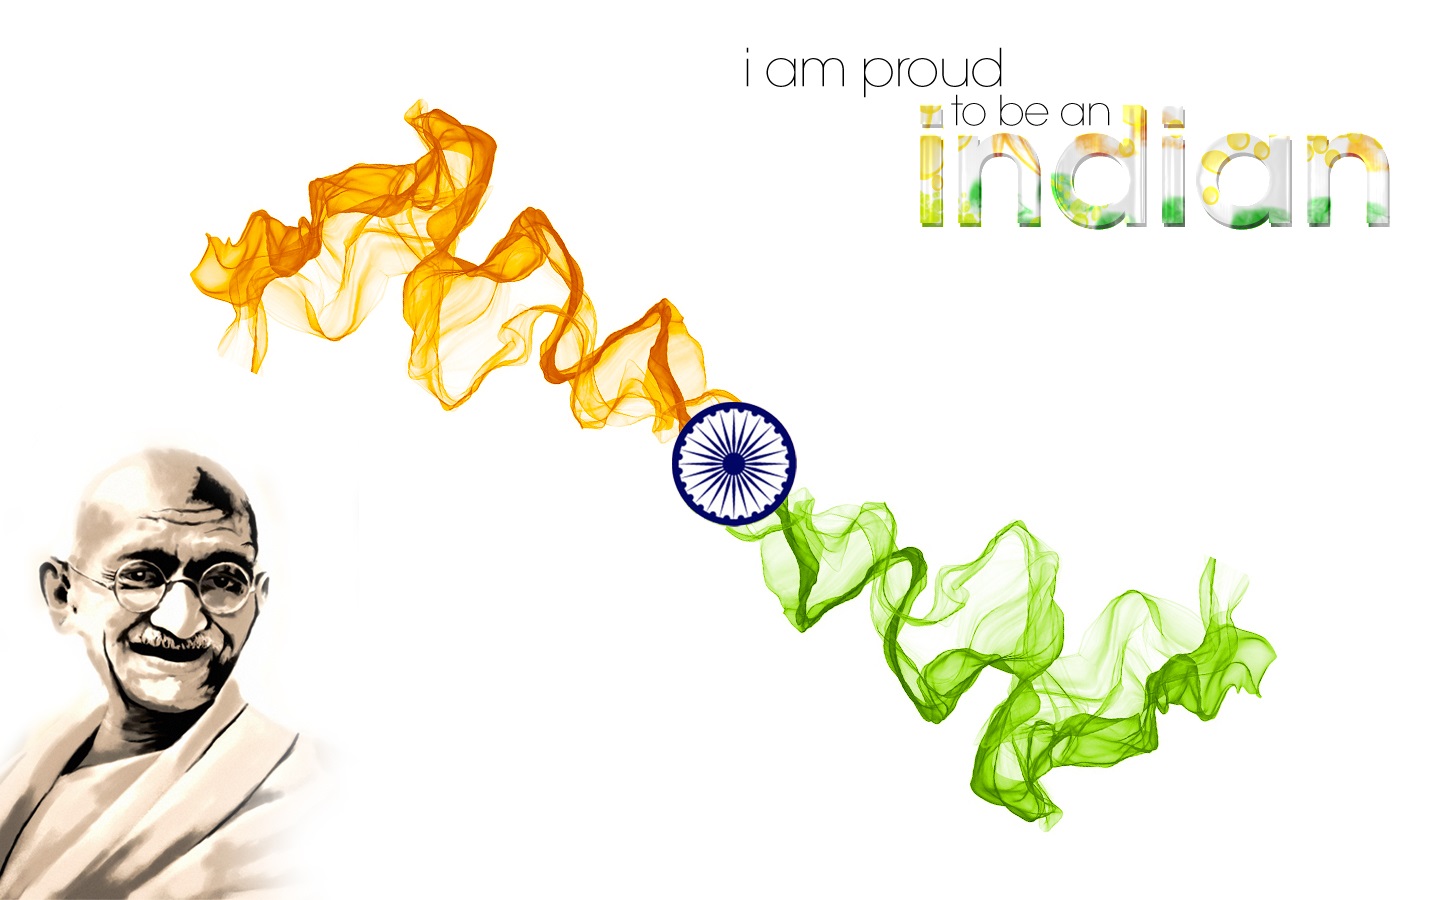 independence day 2019 india, independence day (india) 2019, indian independence day 2019, which independence day is celebrated in 2019, 73 independence day, 2019 independence day, why do we celebrate independence day in india, speech on independence day 2019